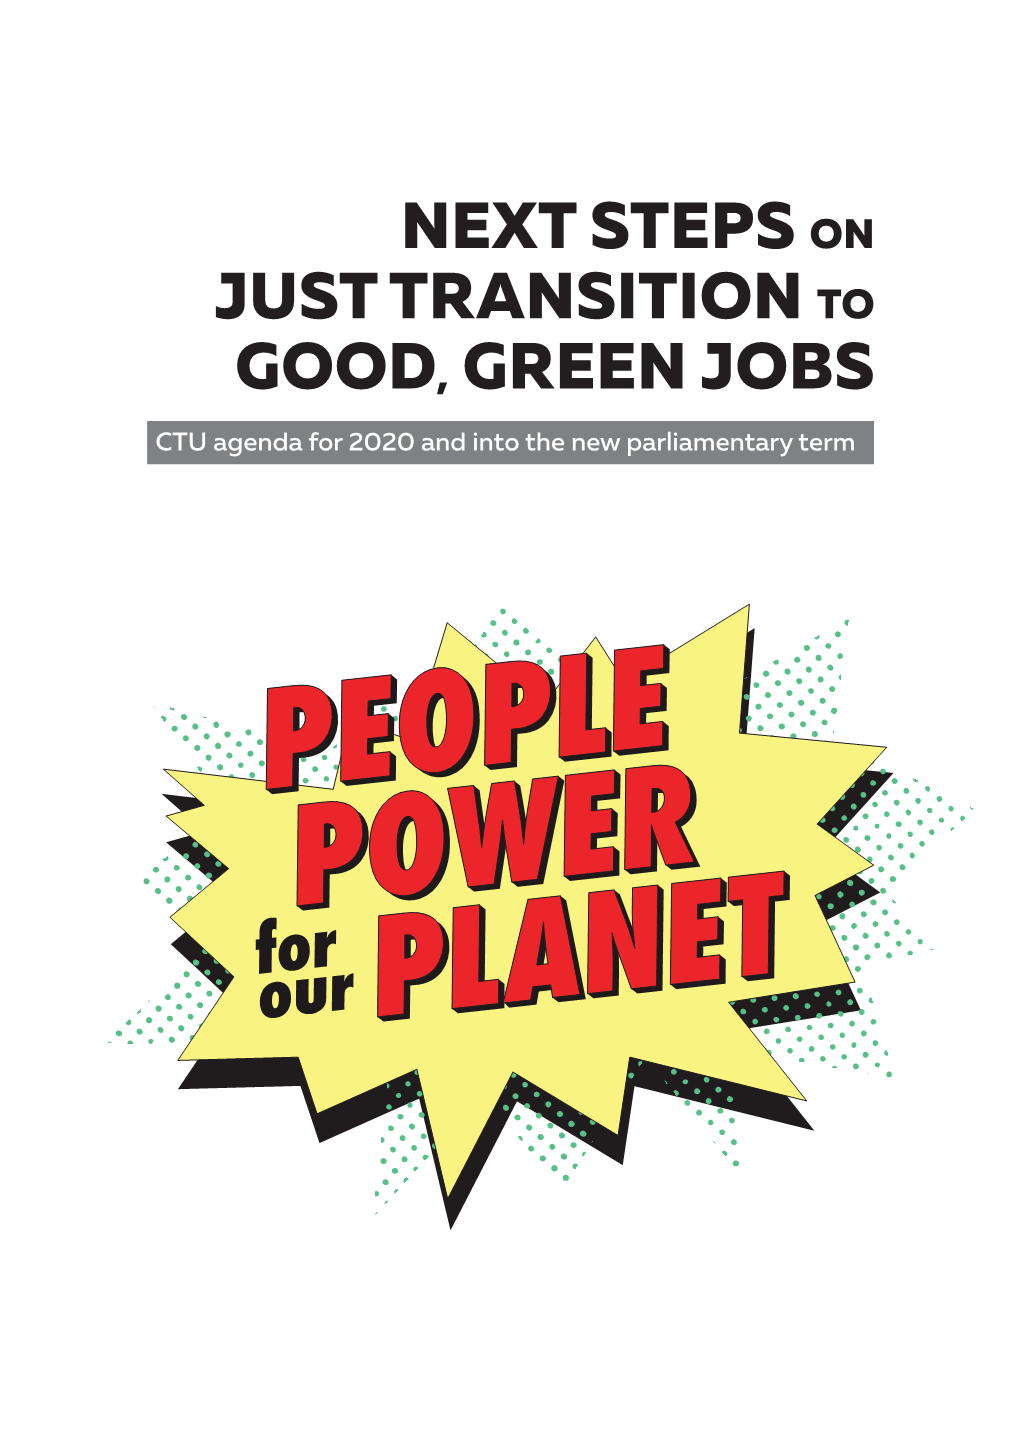 Next Steps on Just Transition to Good, Green Jobs